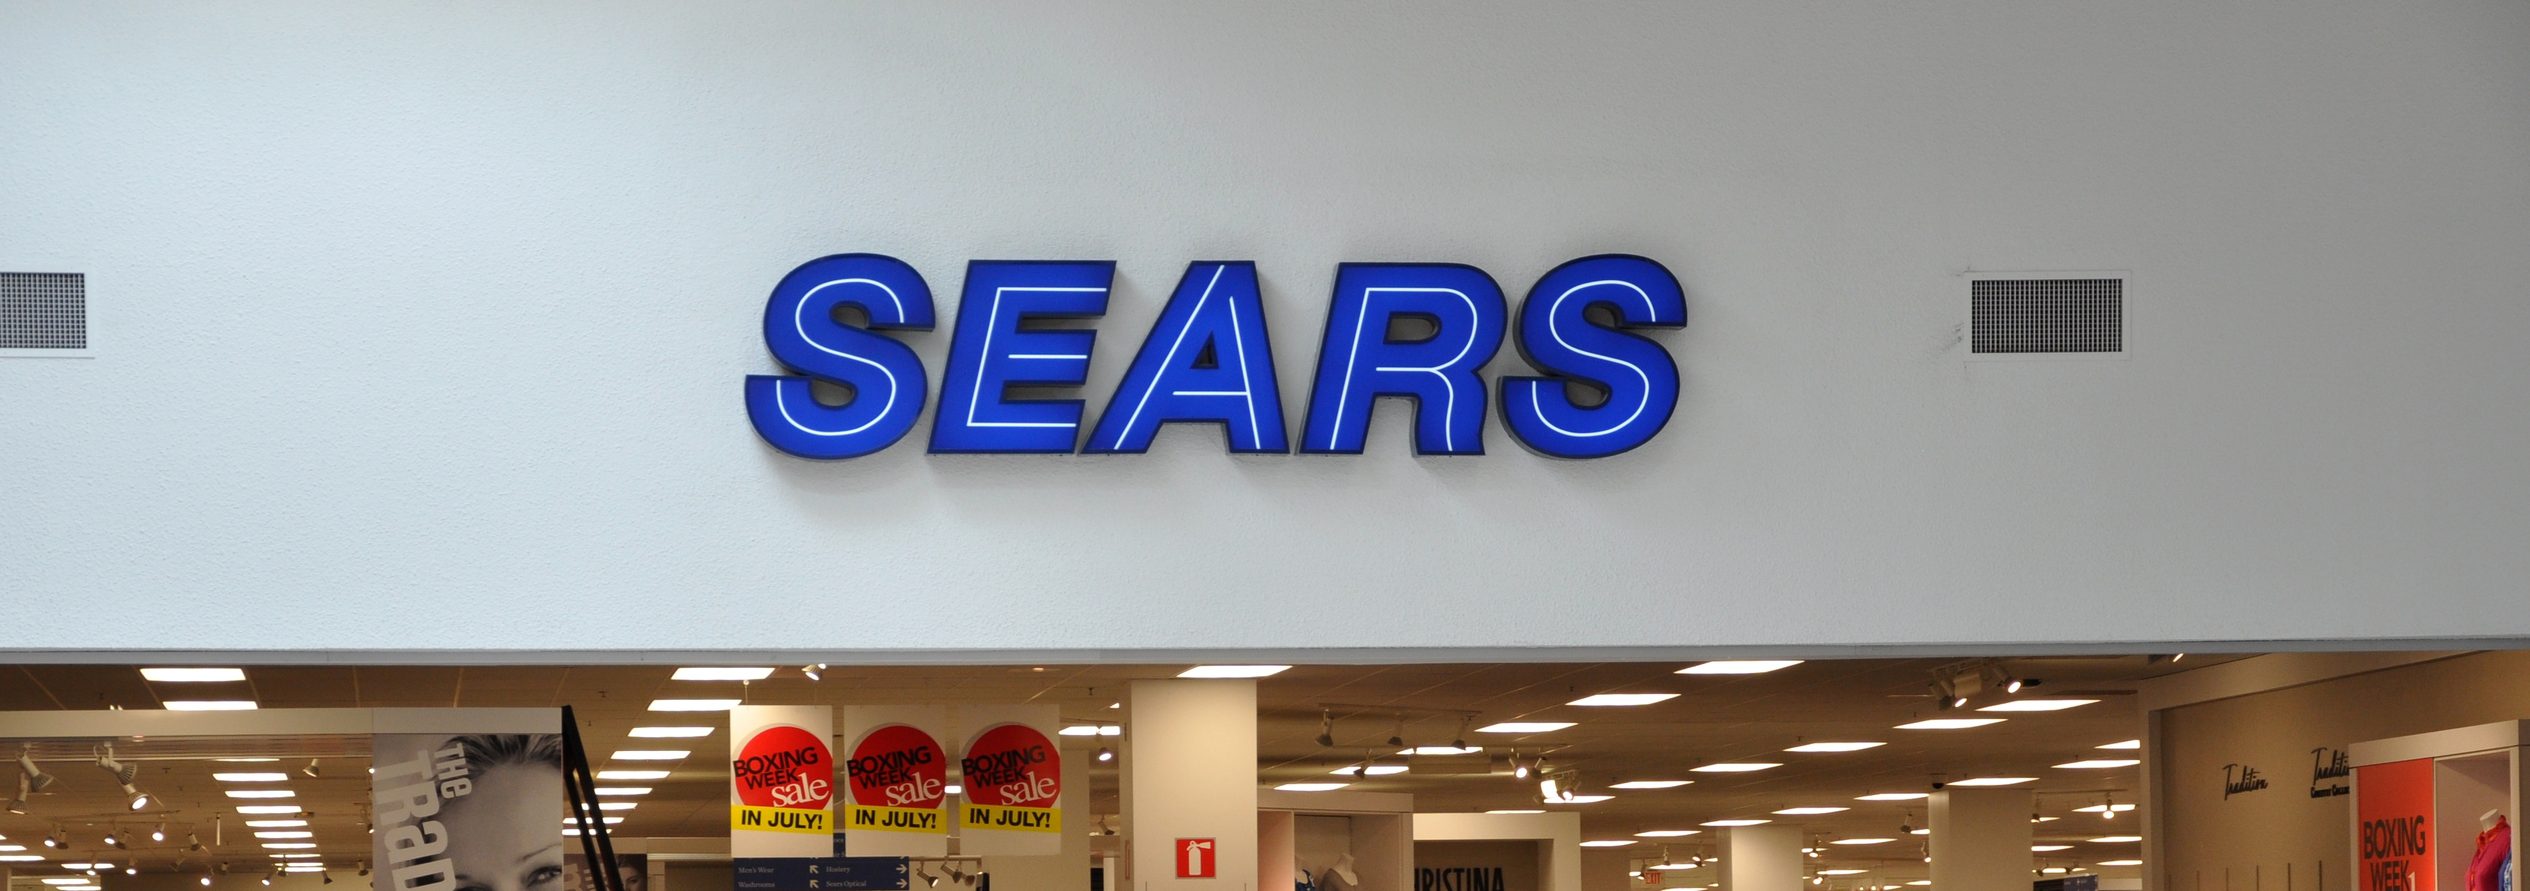 Sears: Get a $5 off $5 coupon via text